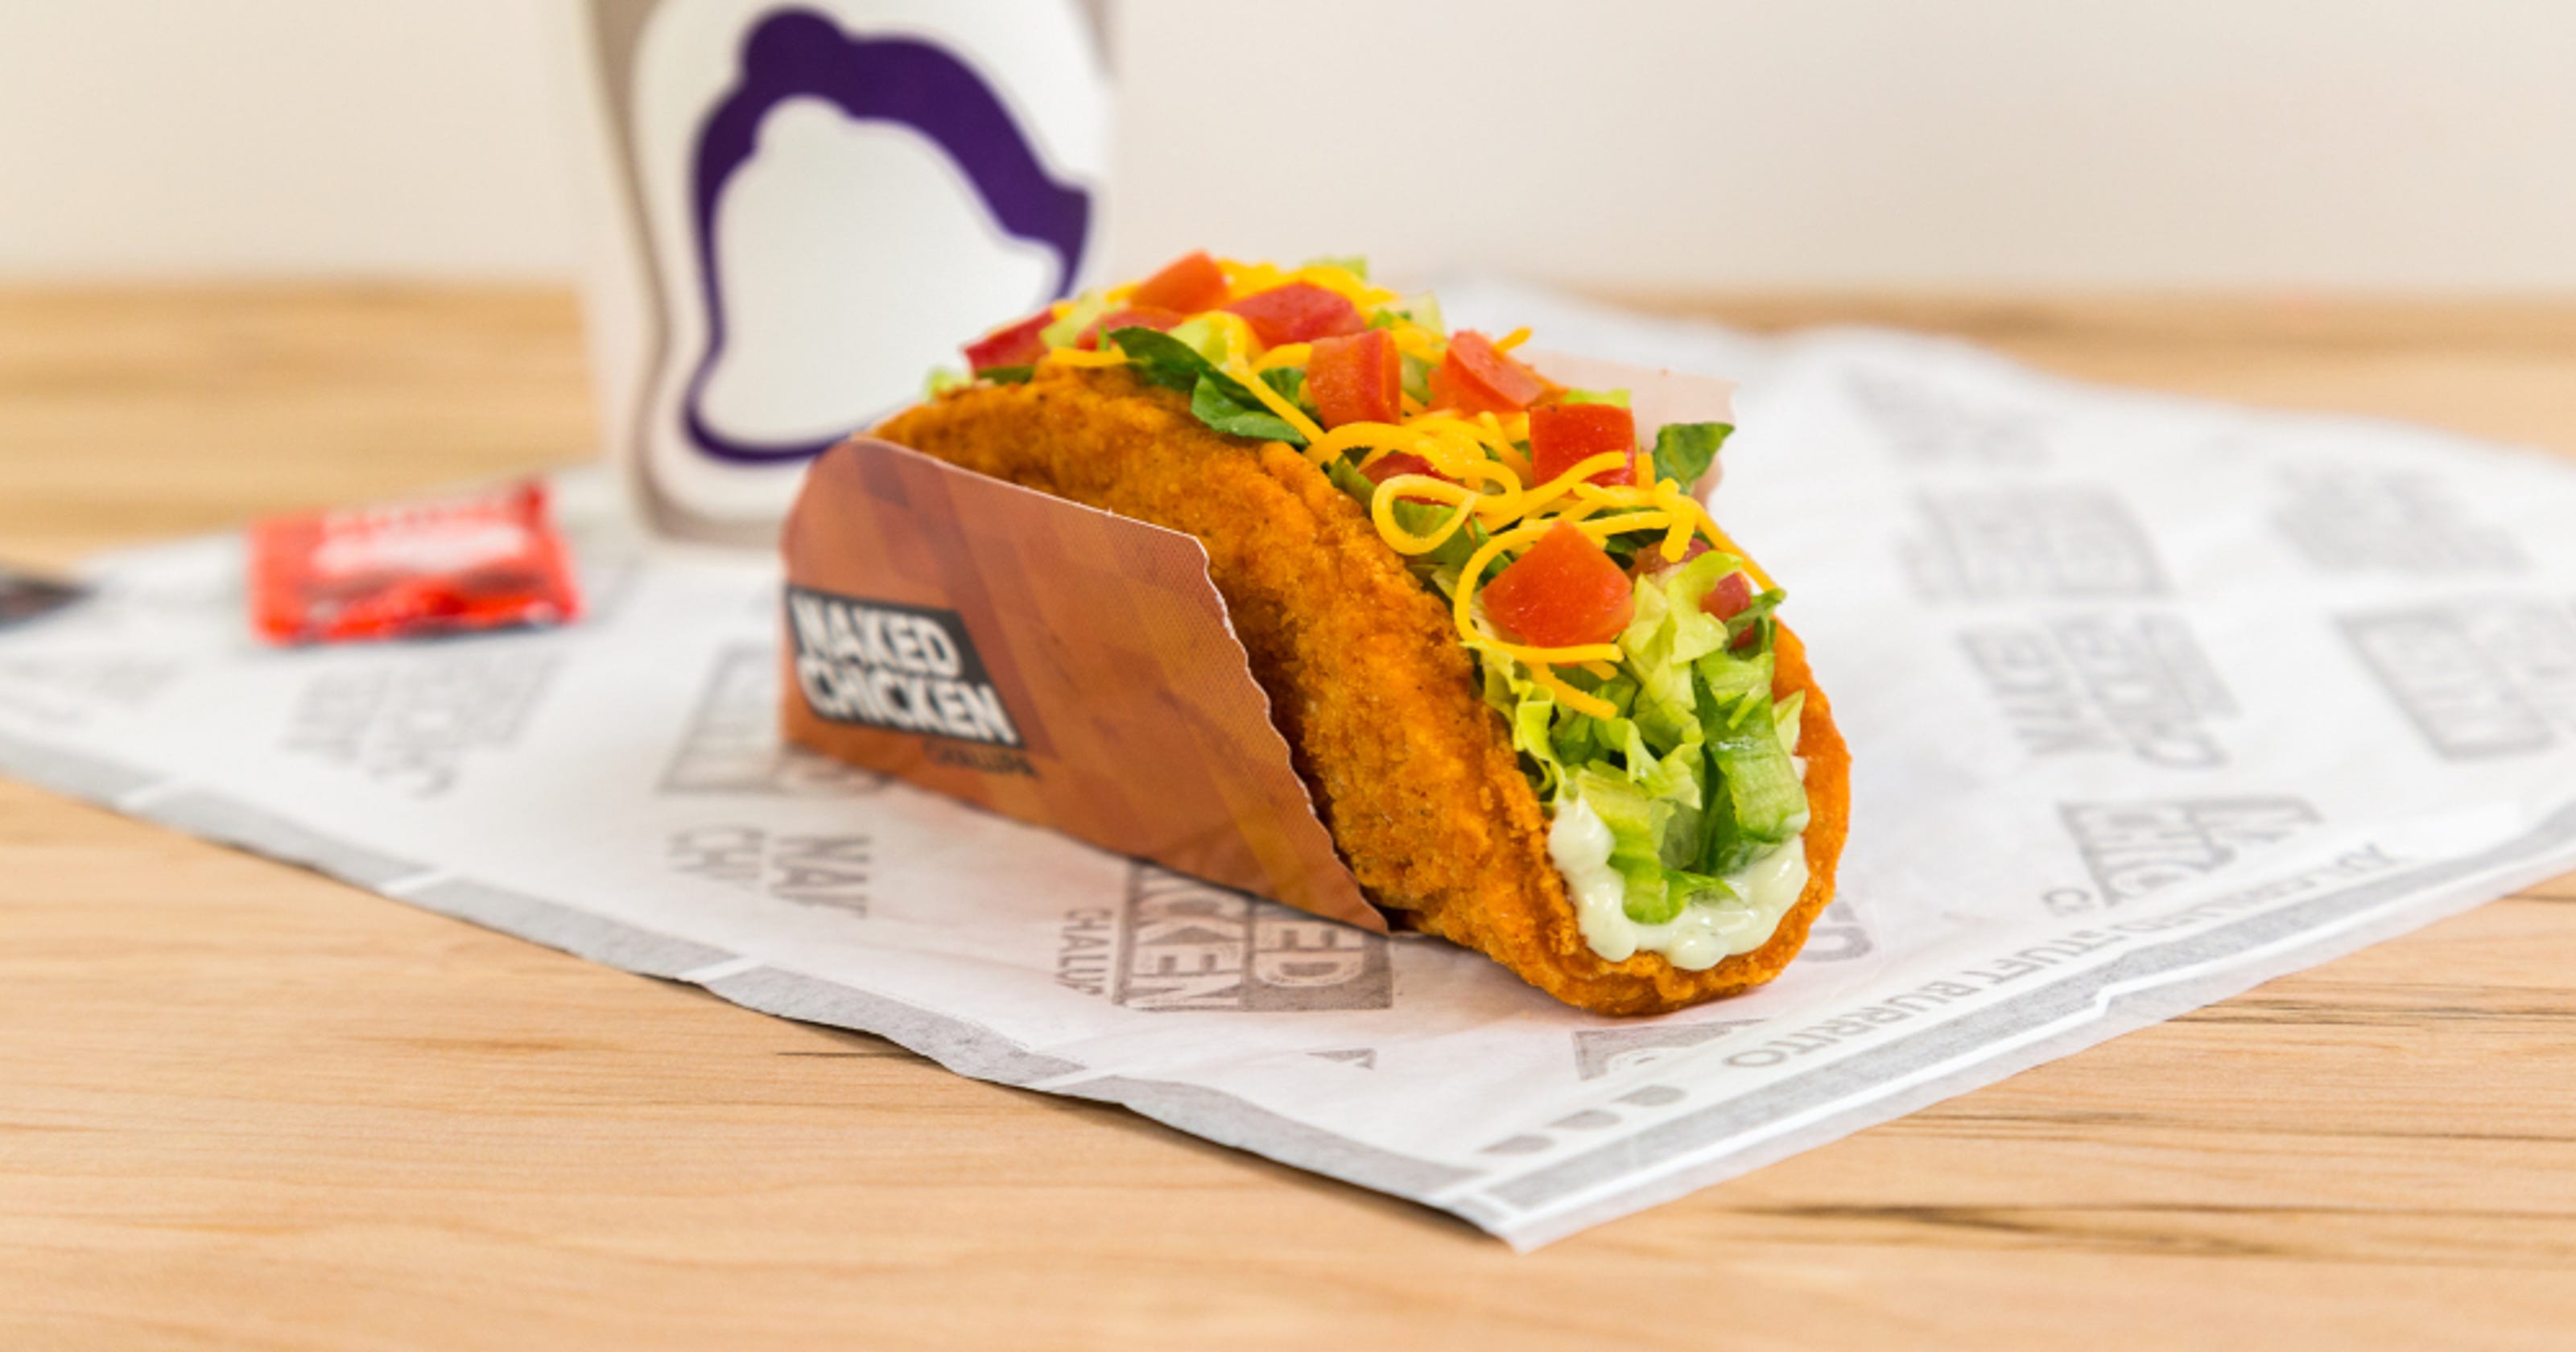 26 at locations nationwide, Taco Bell will begin serving the long-awaited N...